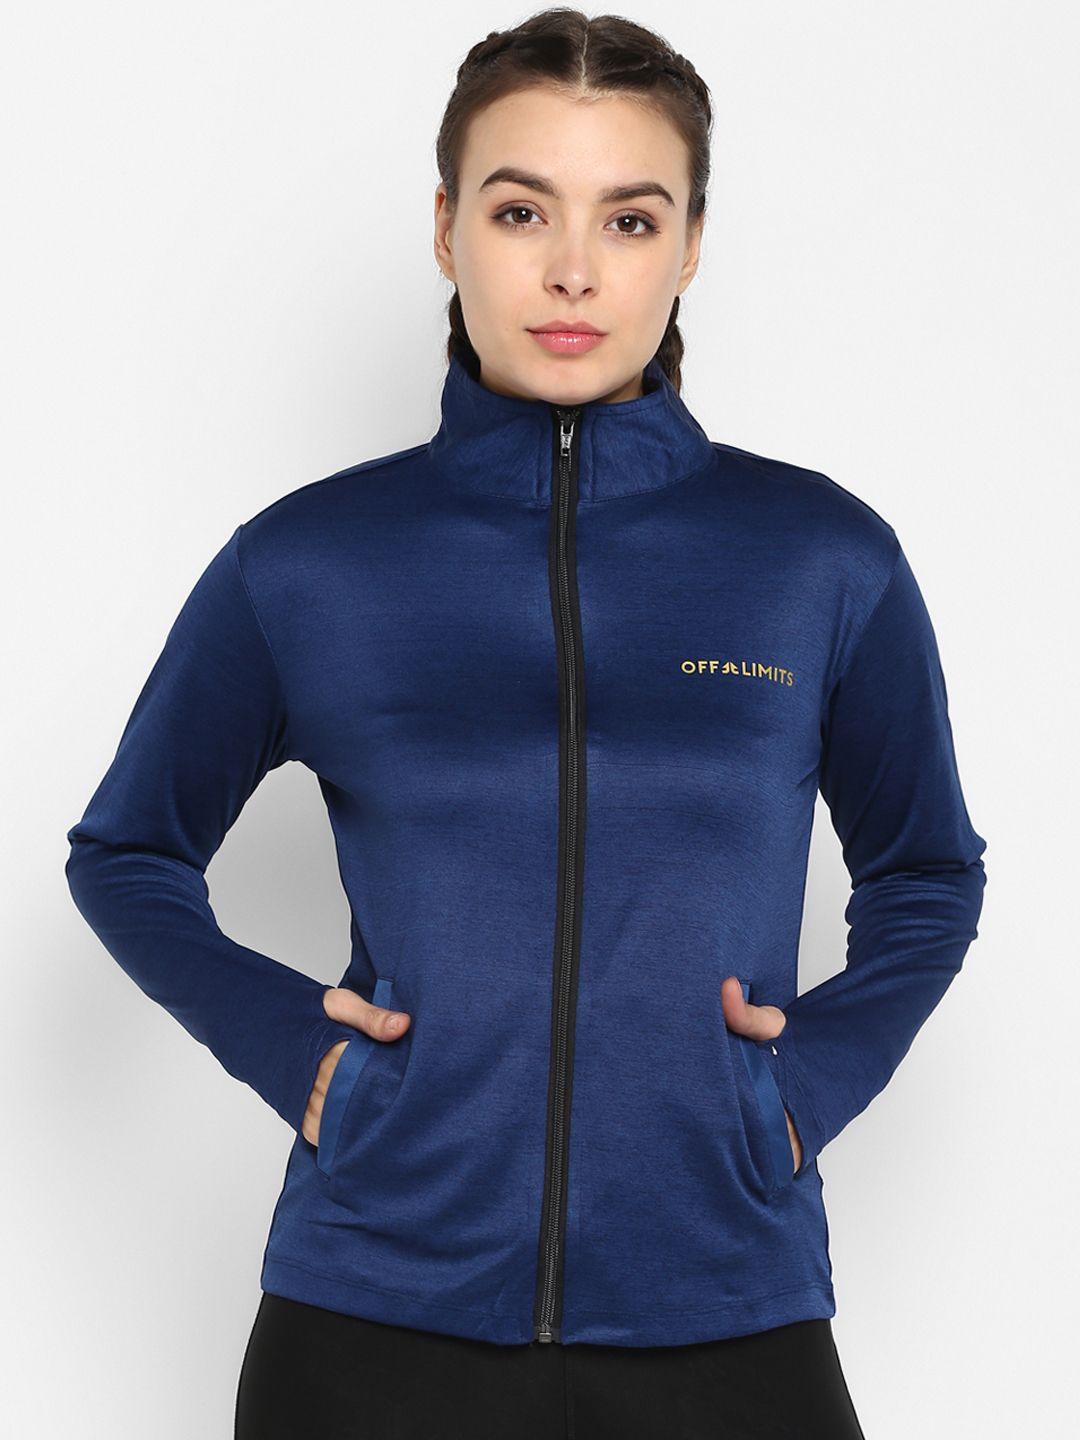 off-limits-women-navy-blue-solid-sporty-jacket